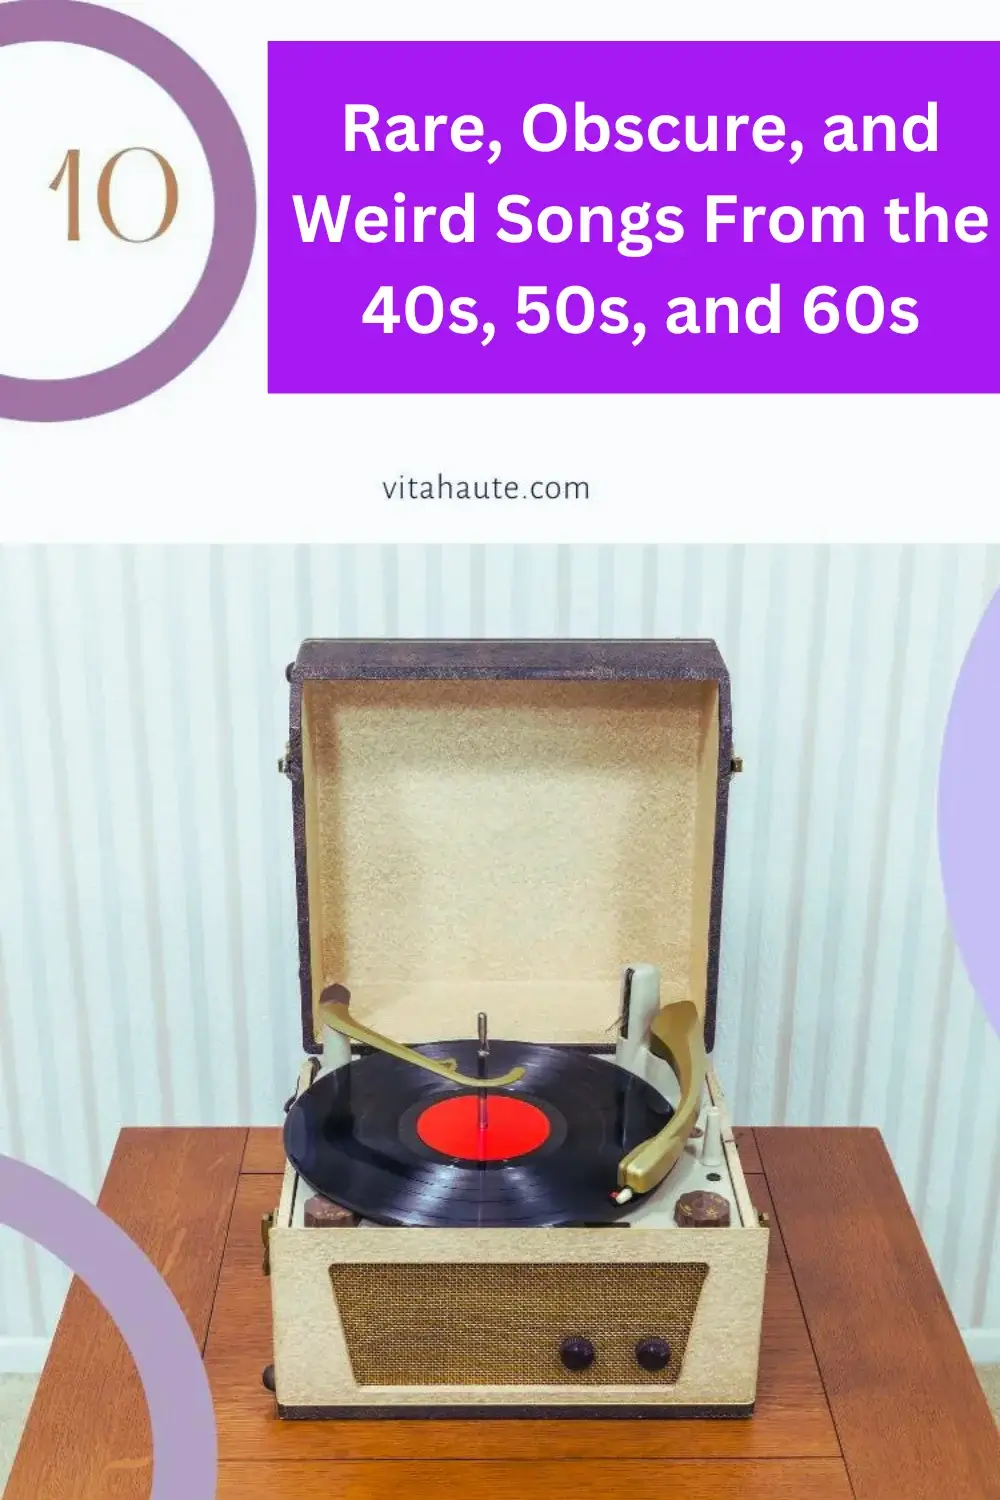 Vintage record player with a stack of colorful vinyl records, representing the eclectic mix of 10 Unusual, Funny, and Rare Songs From the 40s, 50s, and 60s featured in this blog post